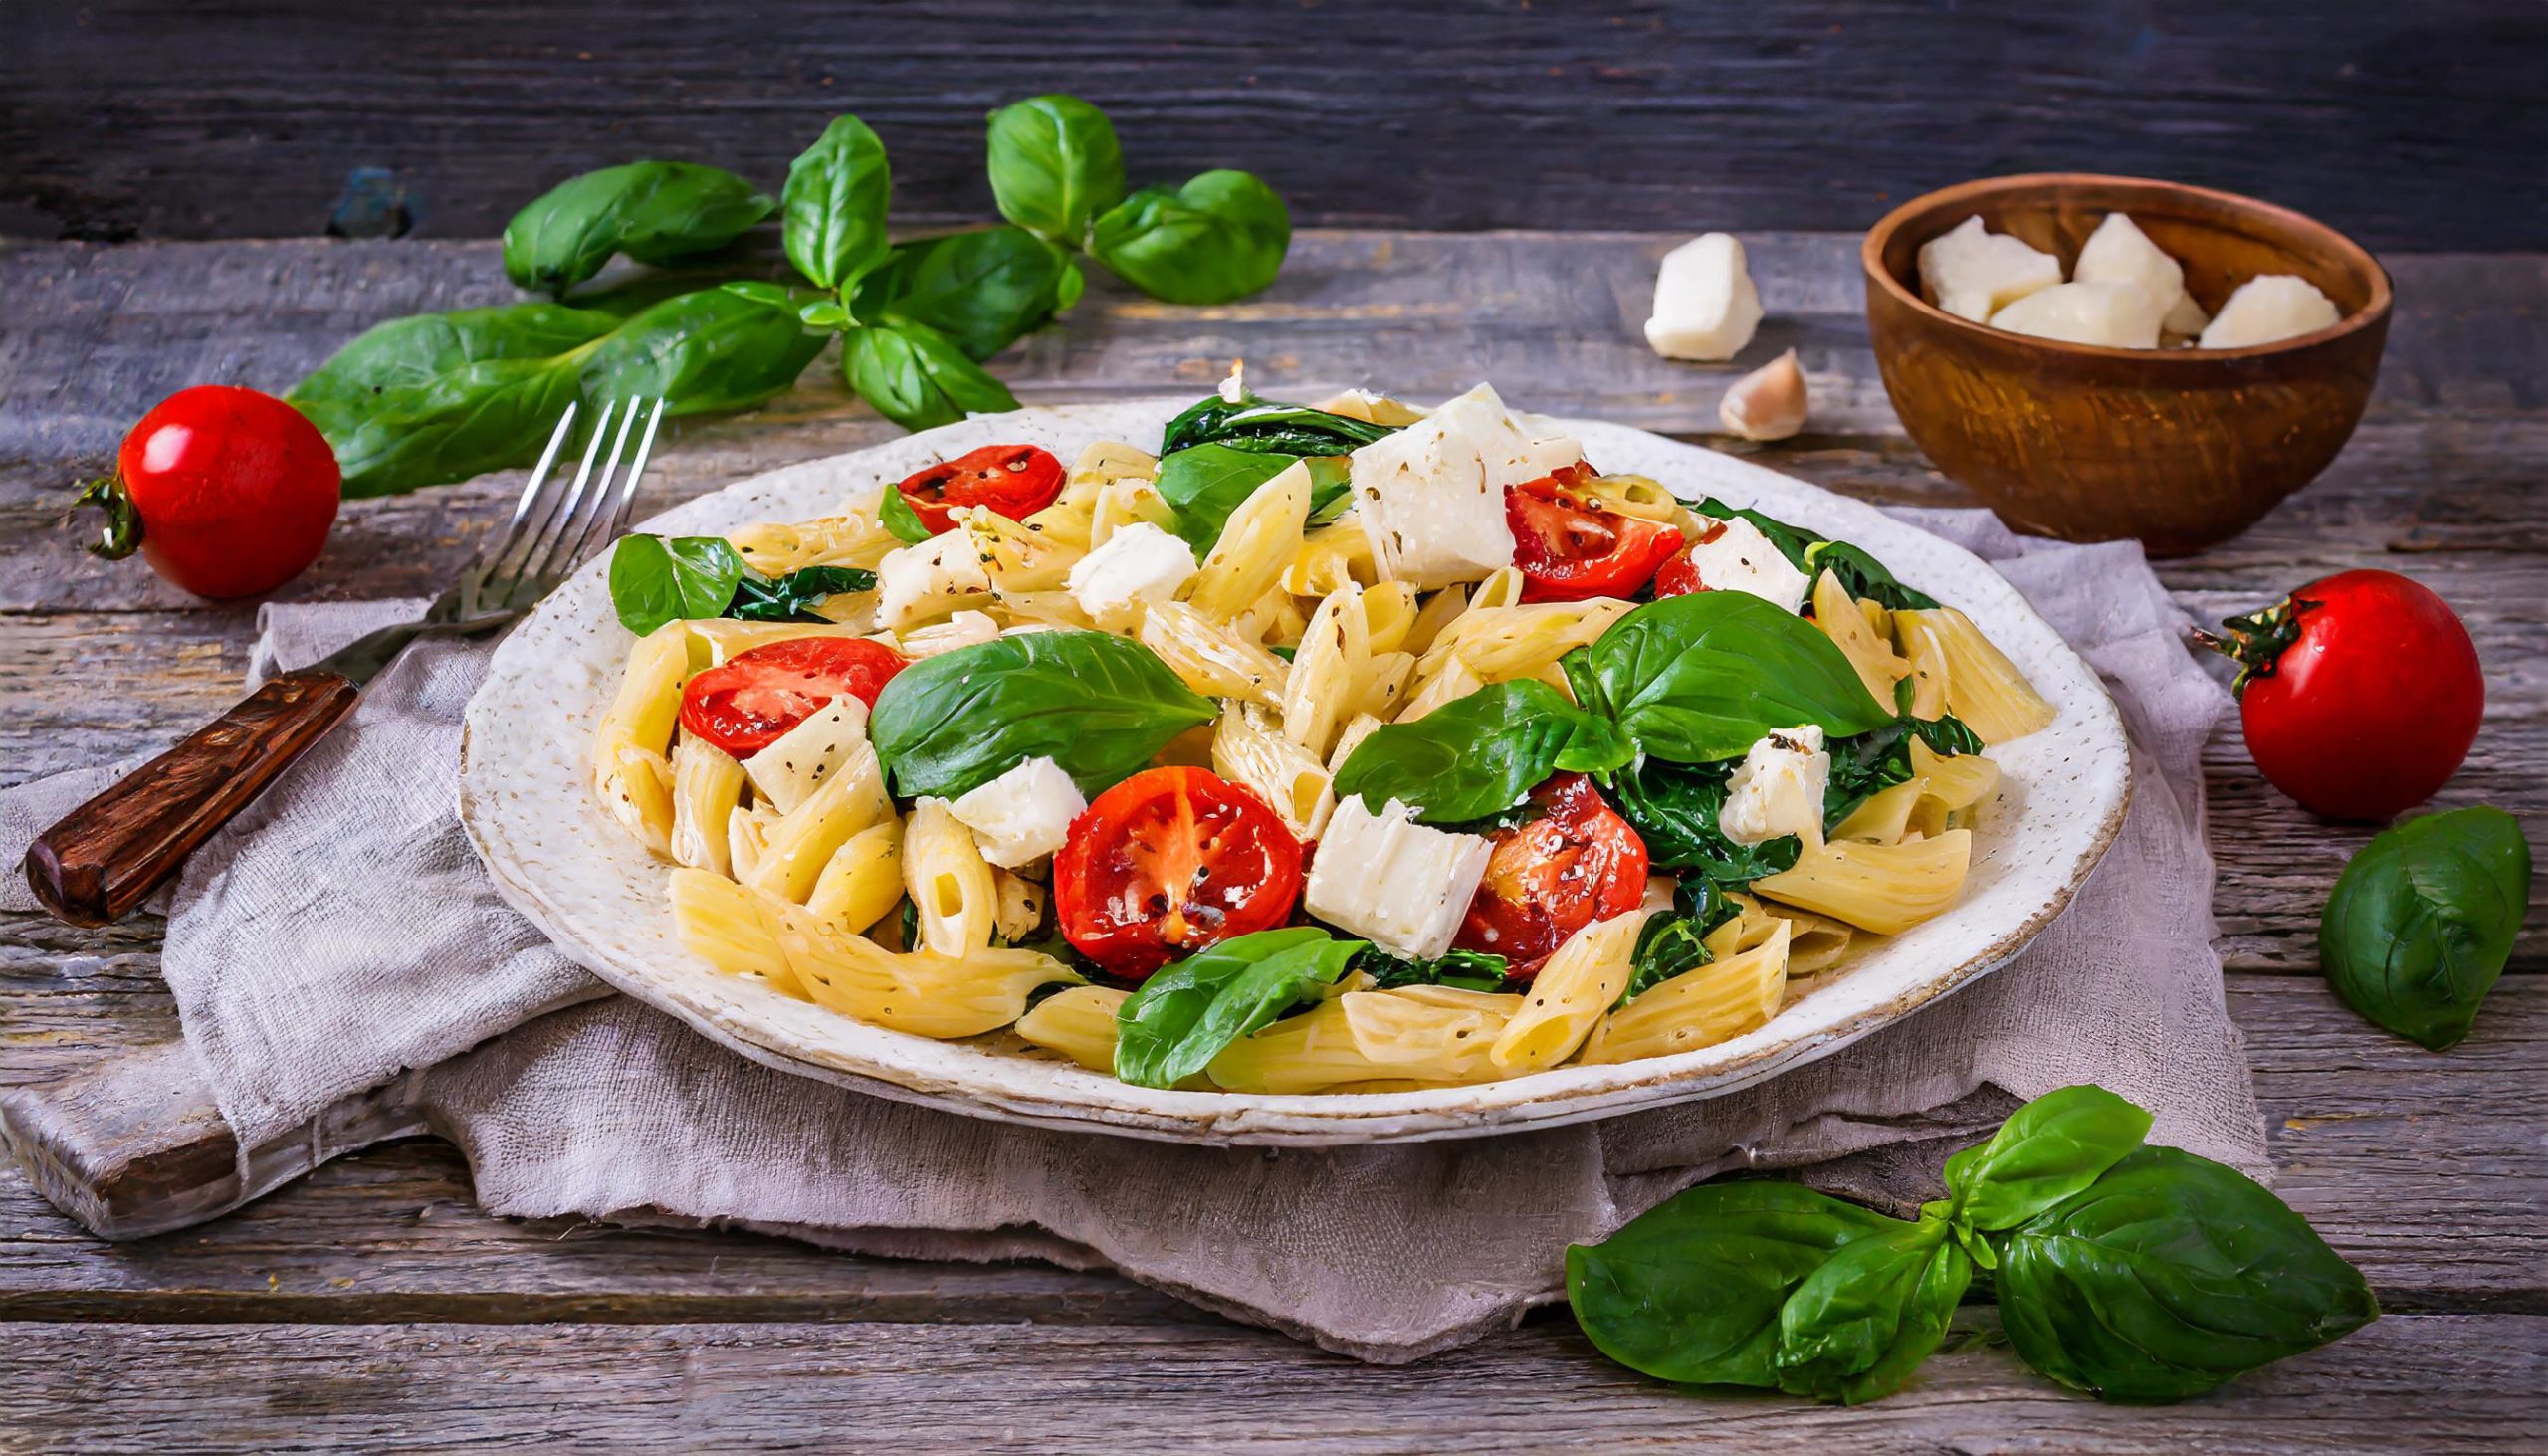 Pasta with tomato, spinach, basil, and brie